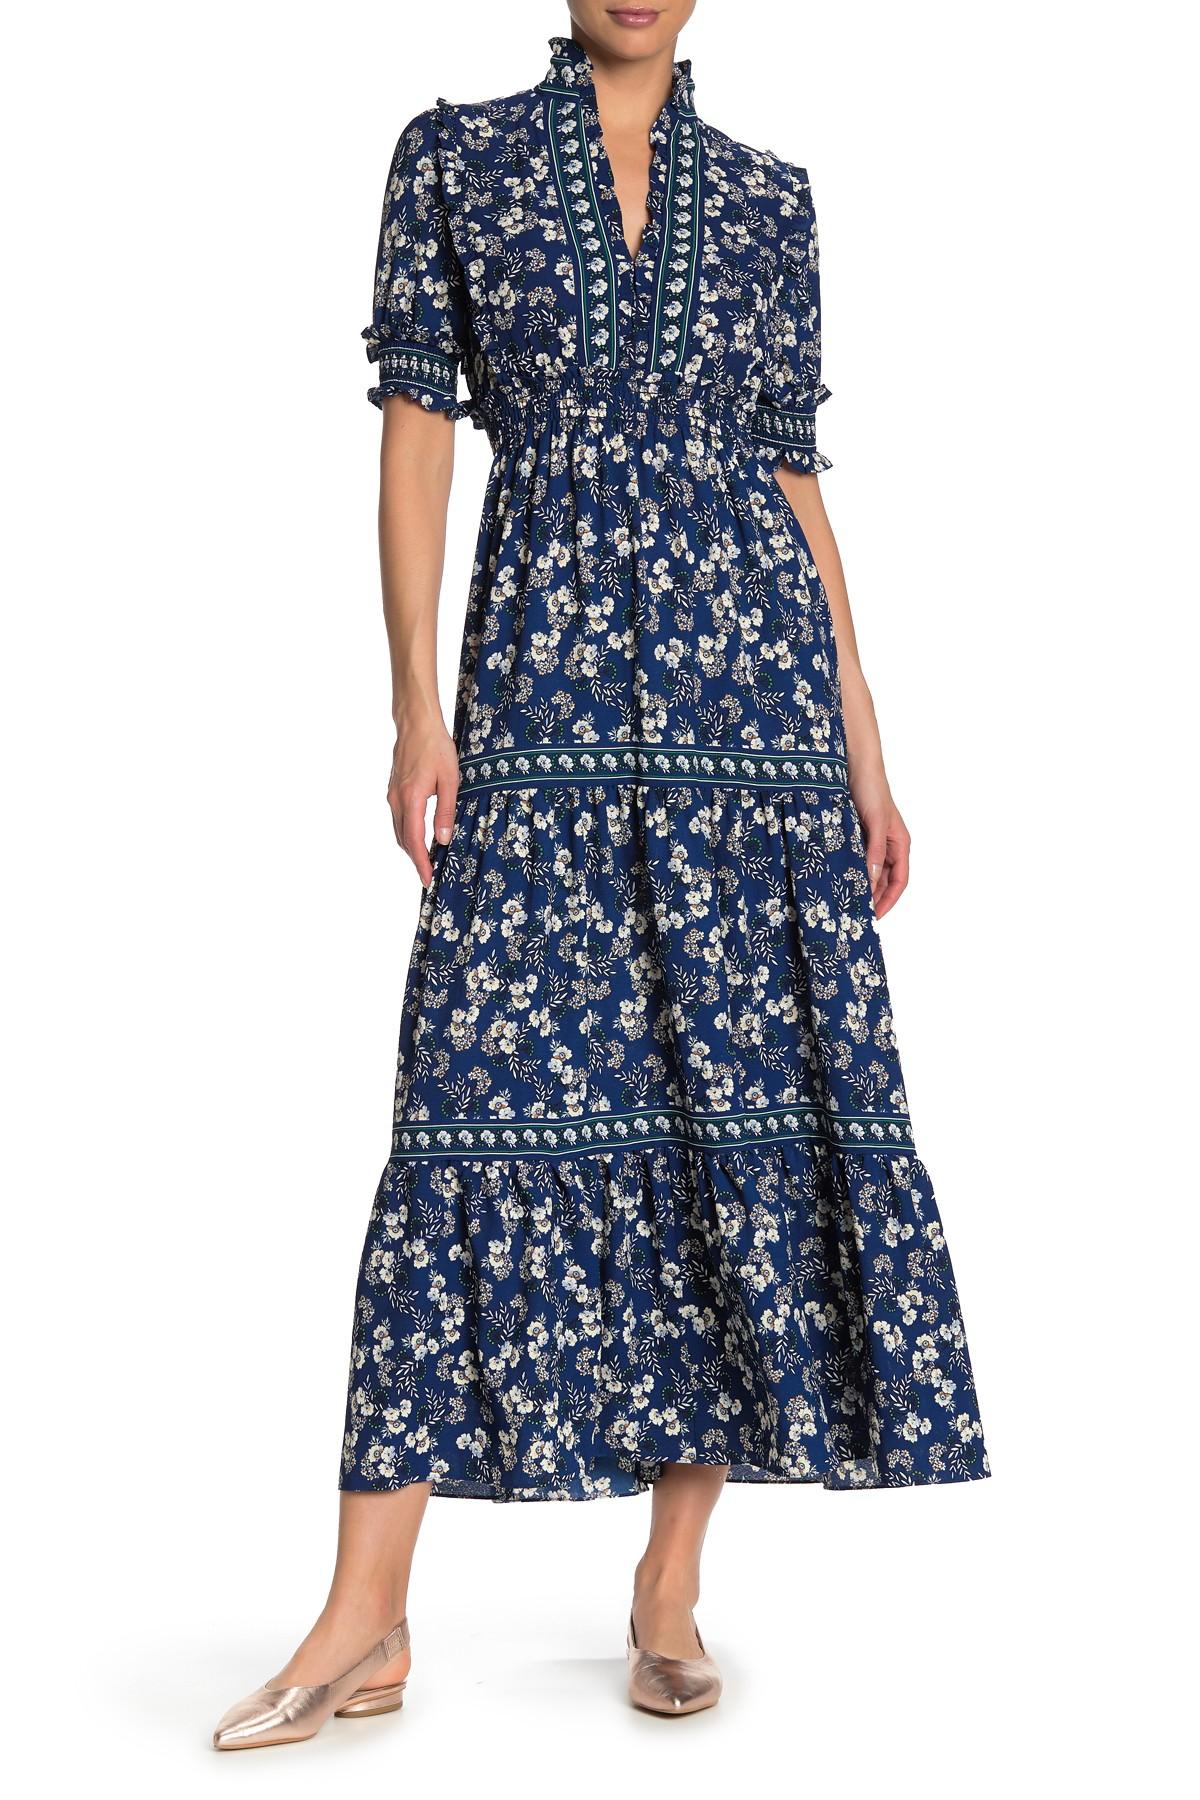 Max Studio Elbow Length Sleeve Print Tiered Maxi Dress in Blue | Lyst